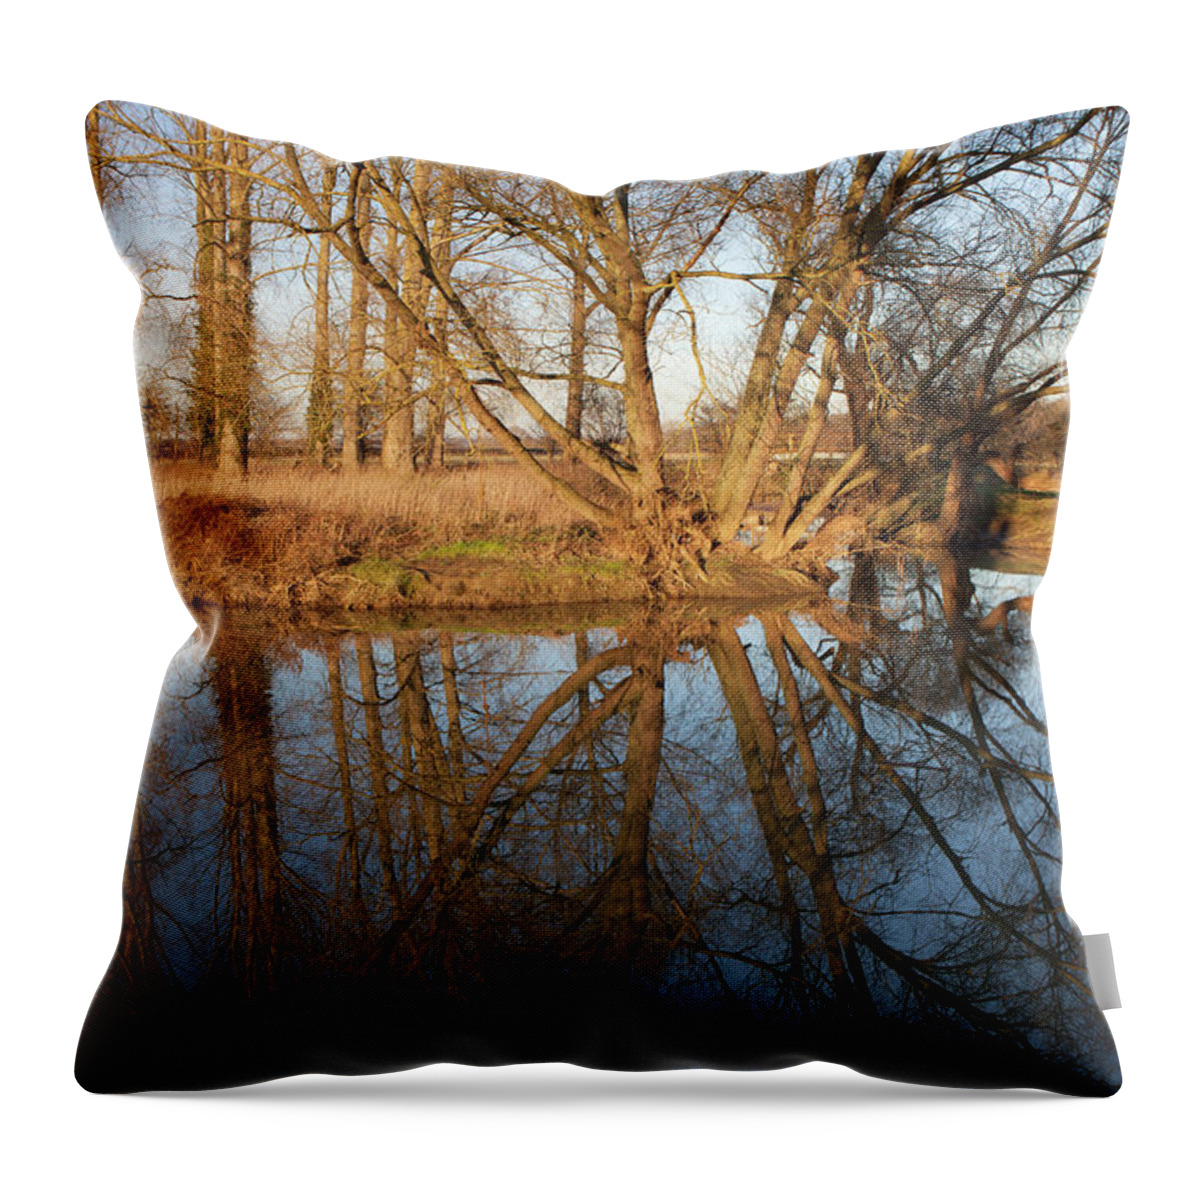 Black Dyke Throw Pillow featuring the photograph Winter reflections, Black Dyke, Peterborough by Nick Atkin